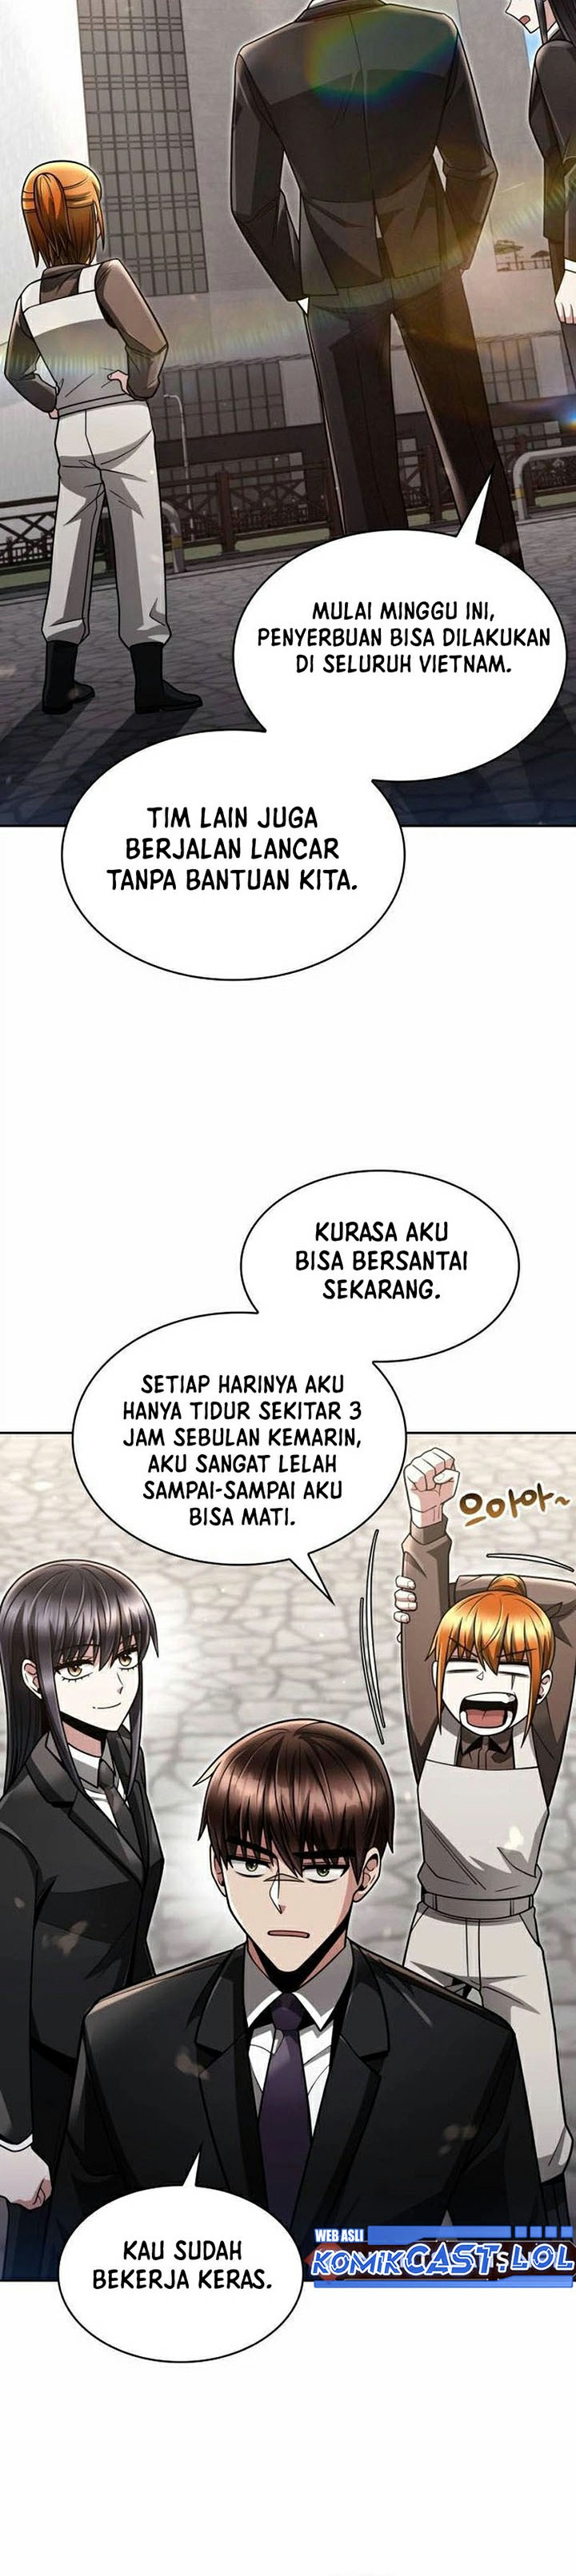 Dilarang COPAS - situs resmi www.mangacanblog.com - Komik clever cleaning life of the returned genius hunter 062 - chapter 62 63 Indonesia clever cleaning life of the returned genius hunter 062 - chapter 62 Terbaru 6|Baca Manga Komik Indonesia|Mangacan